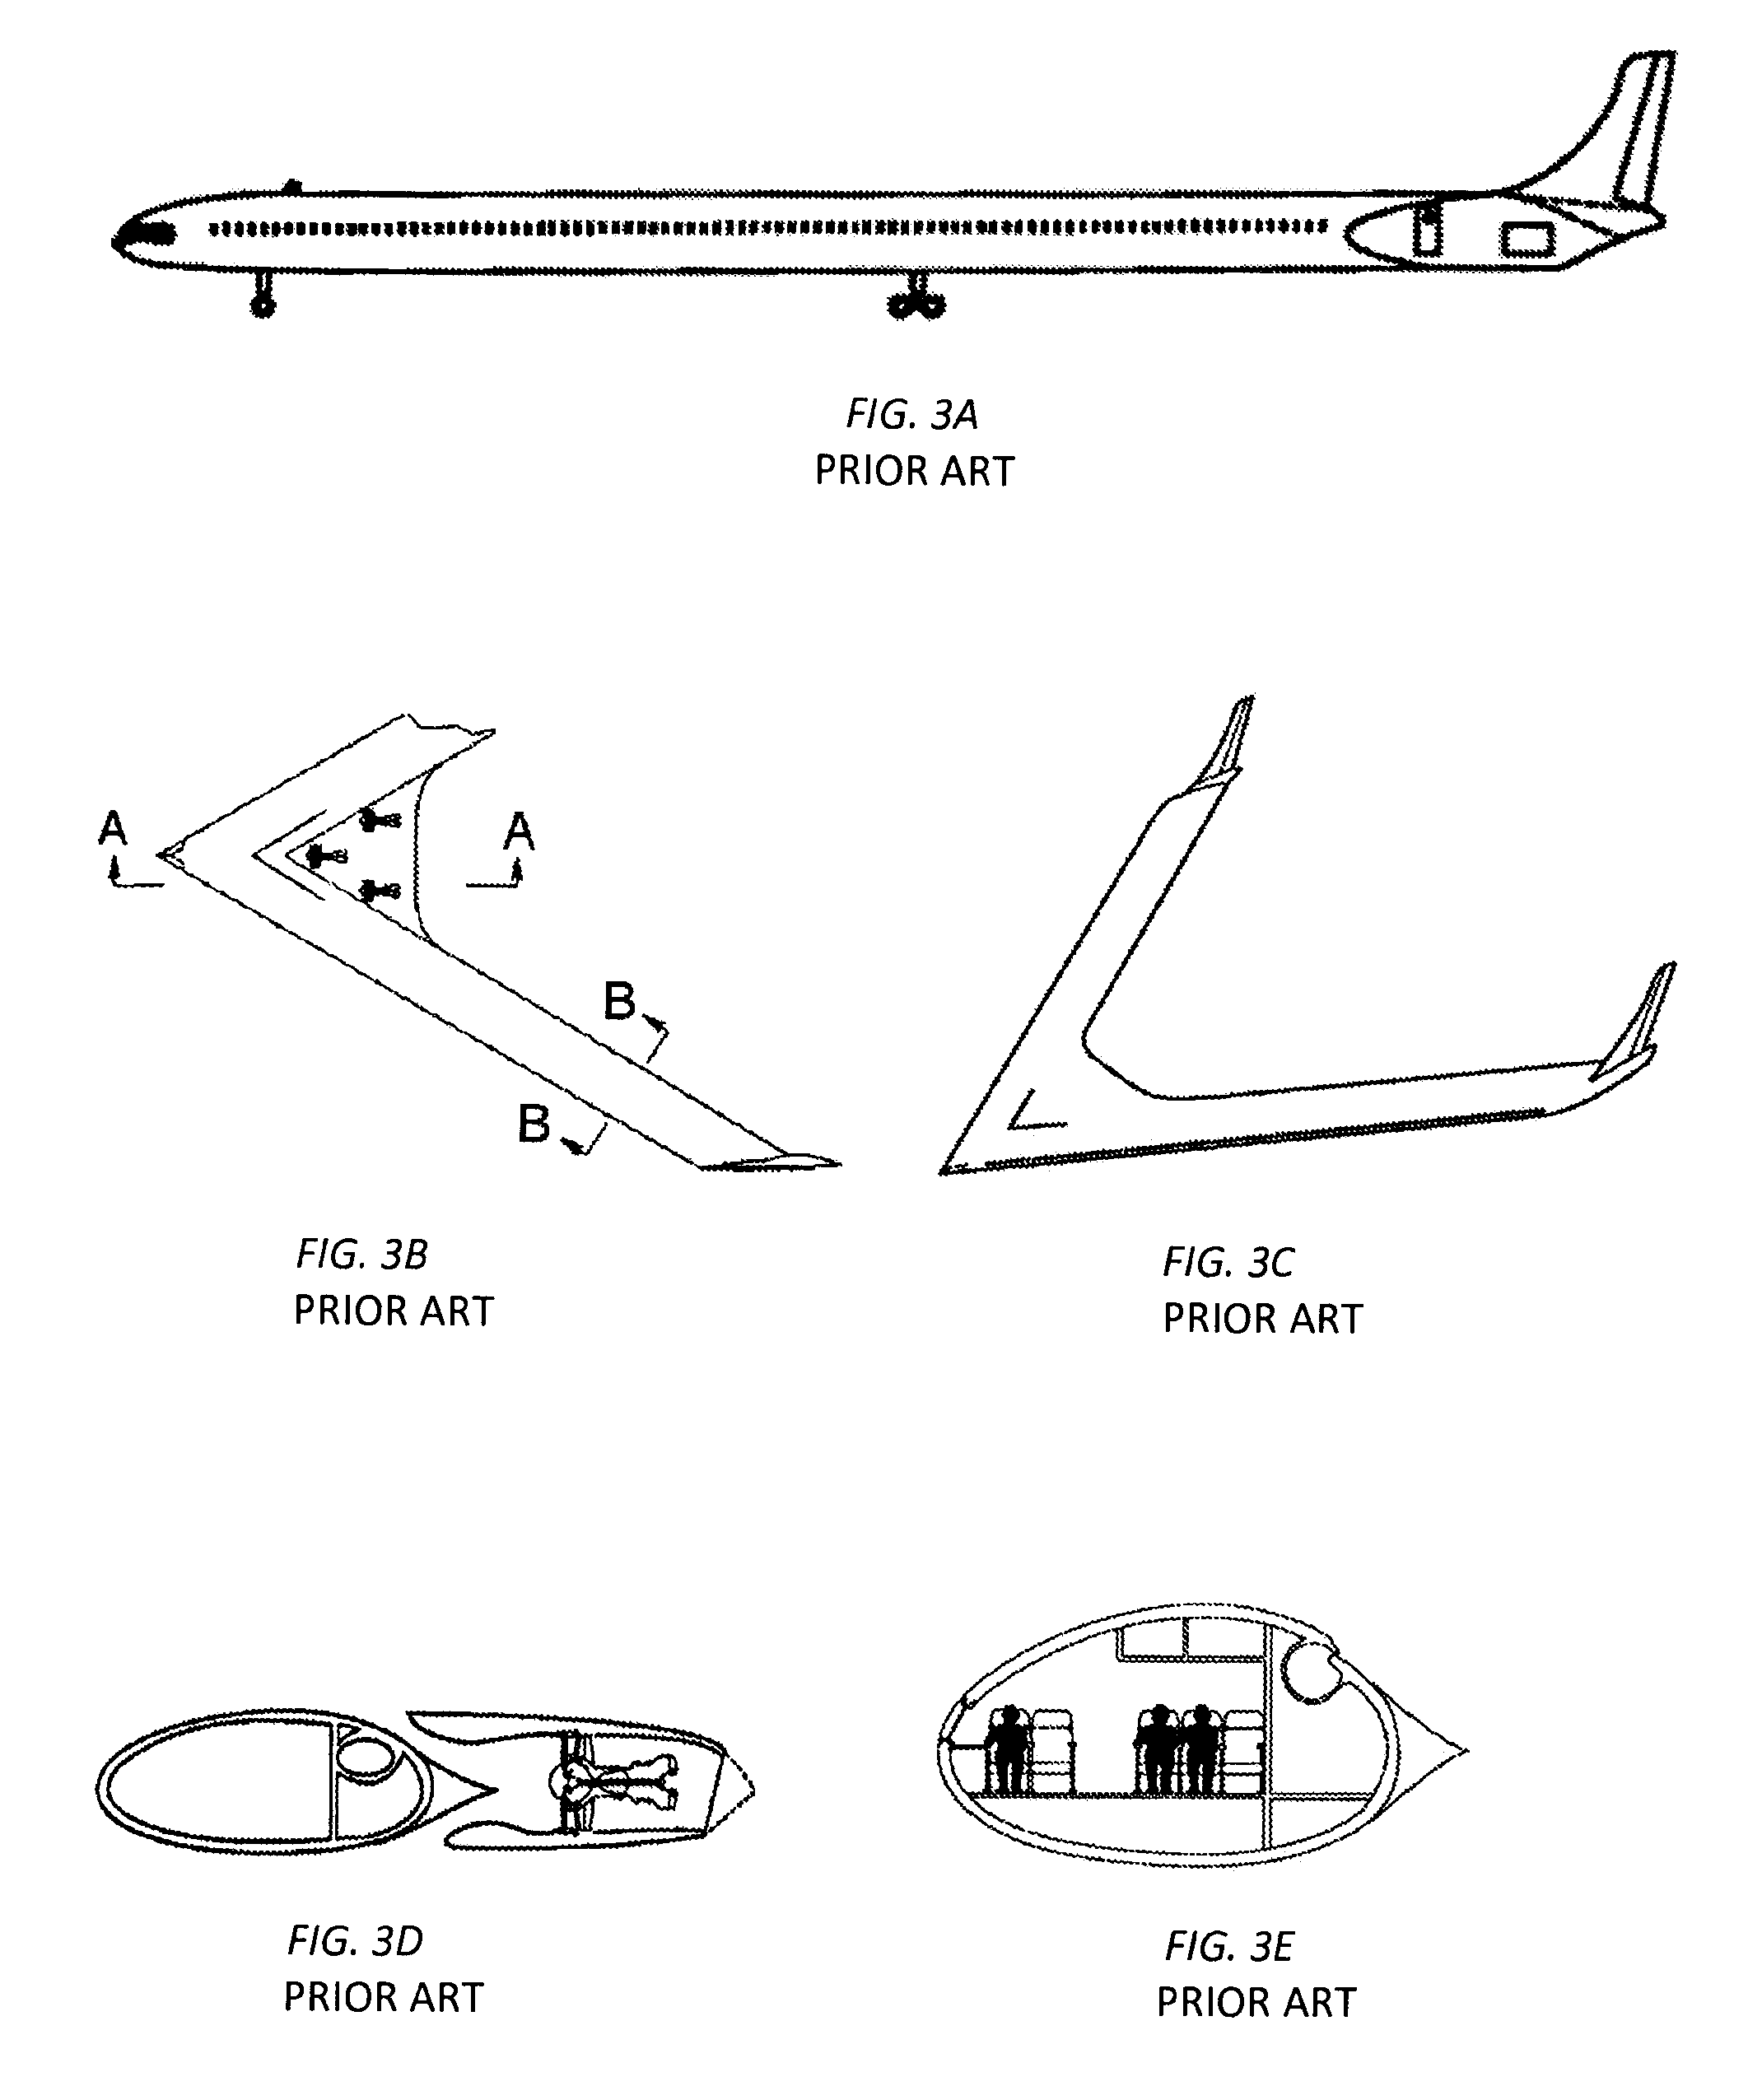 System and method for compact and combinable aerial vehicle capable of vertical/short takeoff and landing